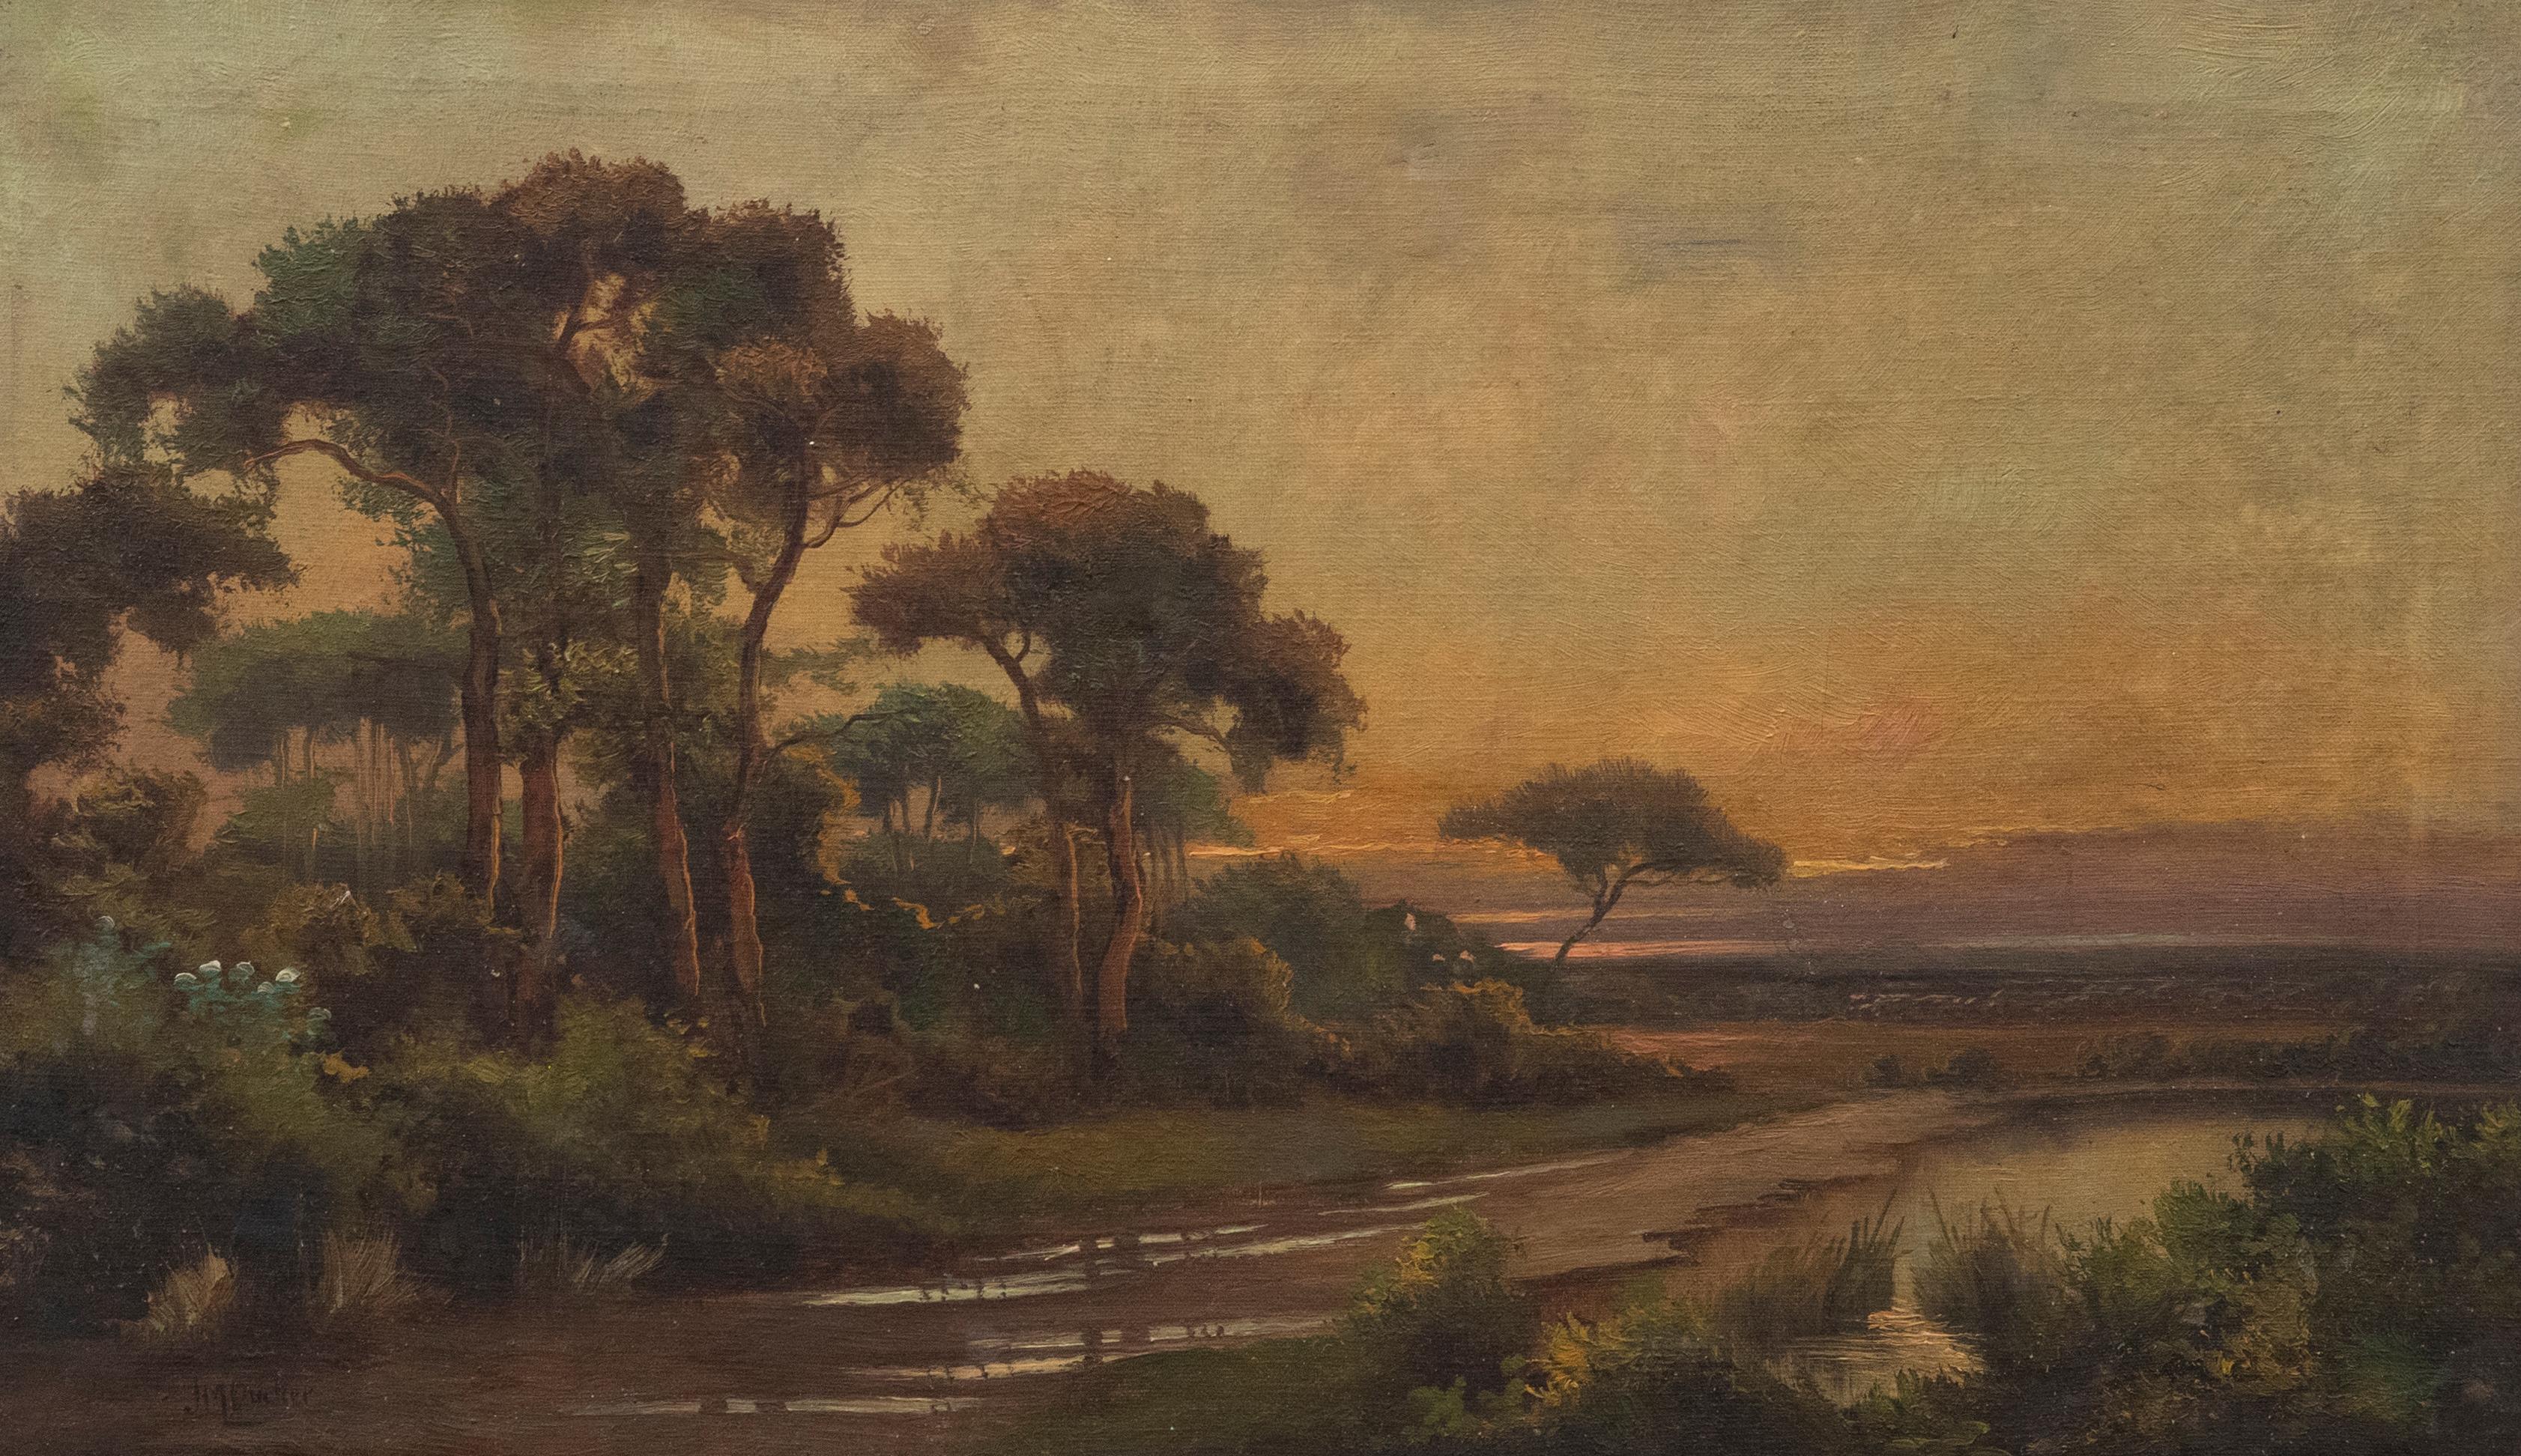 This accomplished landscape depicts a river running through the countryside. On the horizon the sun sets casting a warm have over the scene. Signed to the lower right. On canvas.